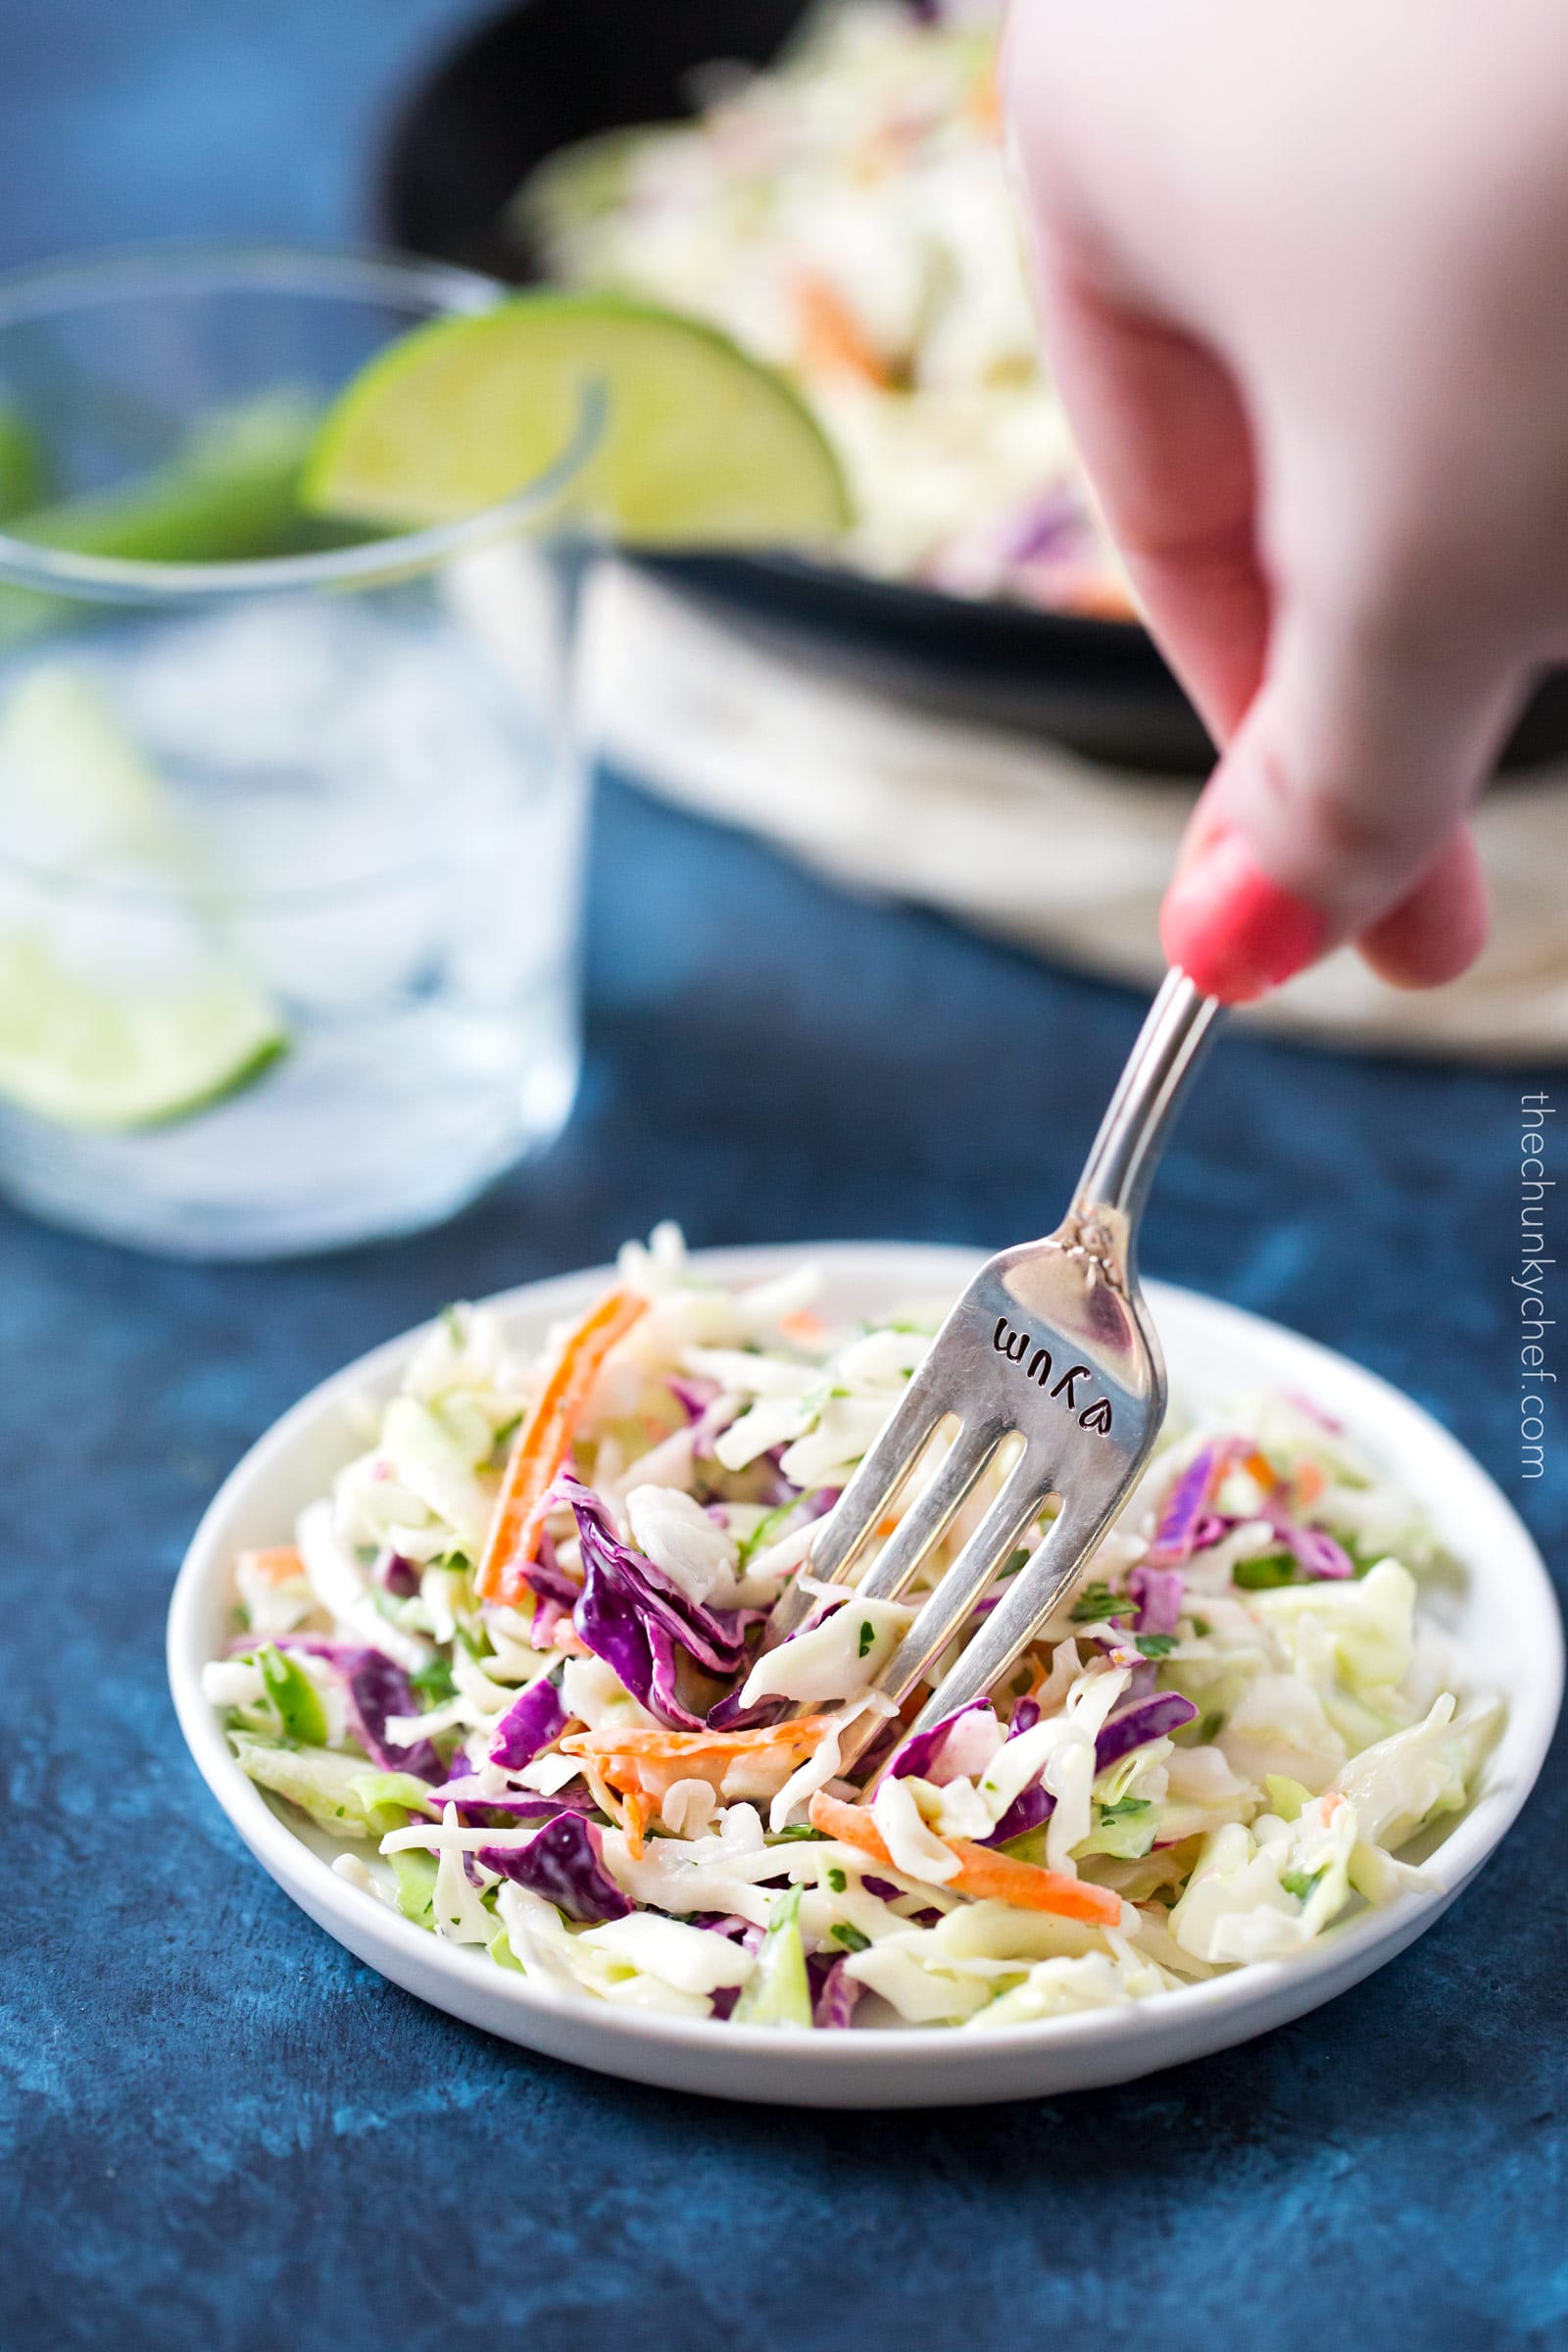 Tequila Lime Coleslaw with Cilantro | This unique coleslaw recipe combines great Mexican flavors like tequila, lime and cilantro, for a truly crowd-pleasing side dish! | http://thechunkychef.com